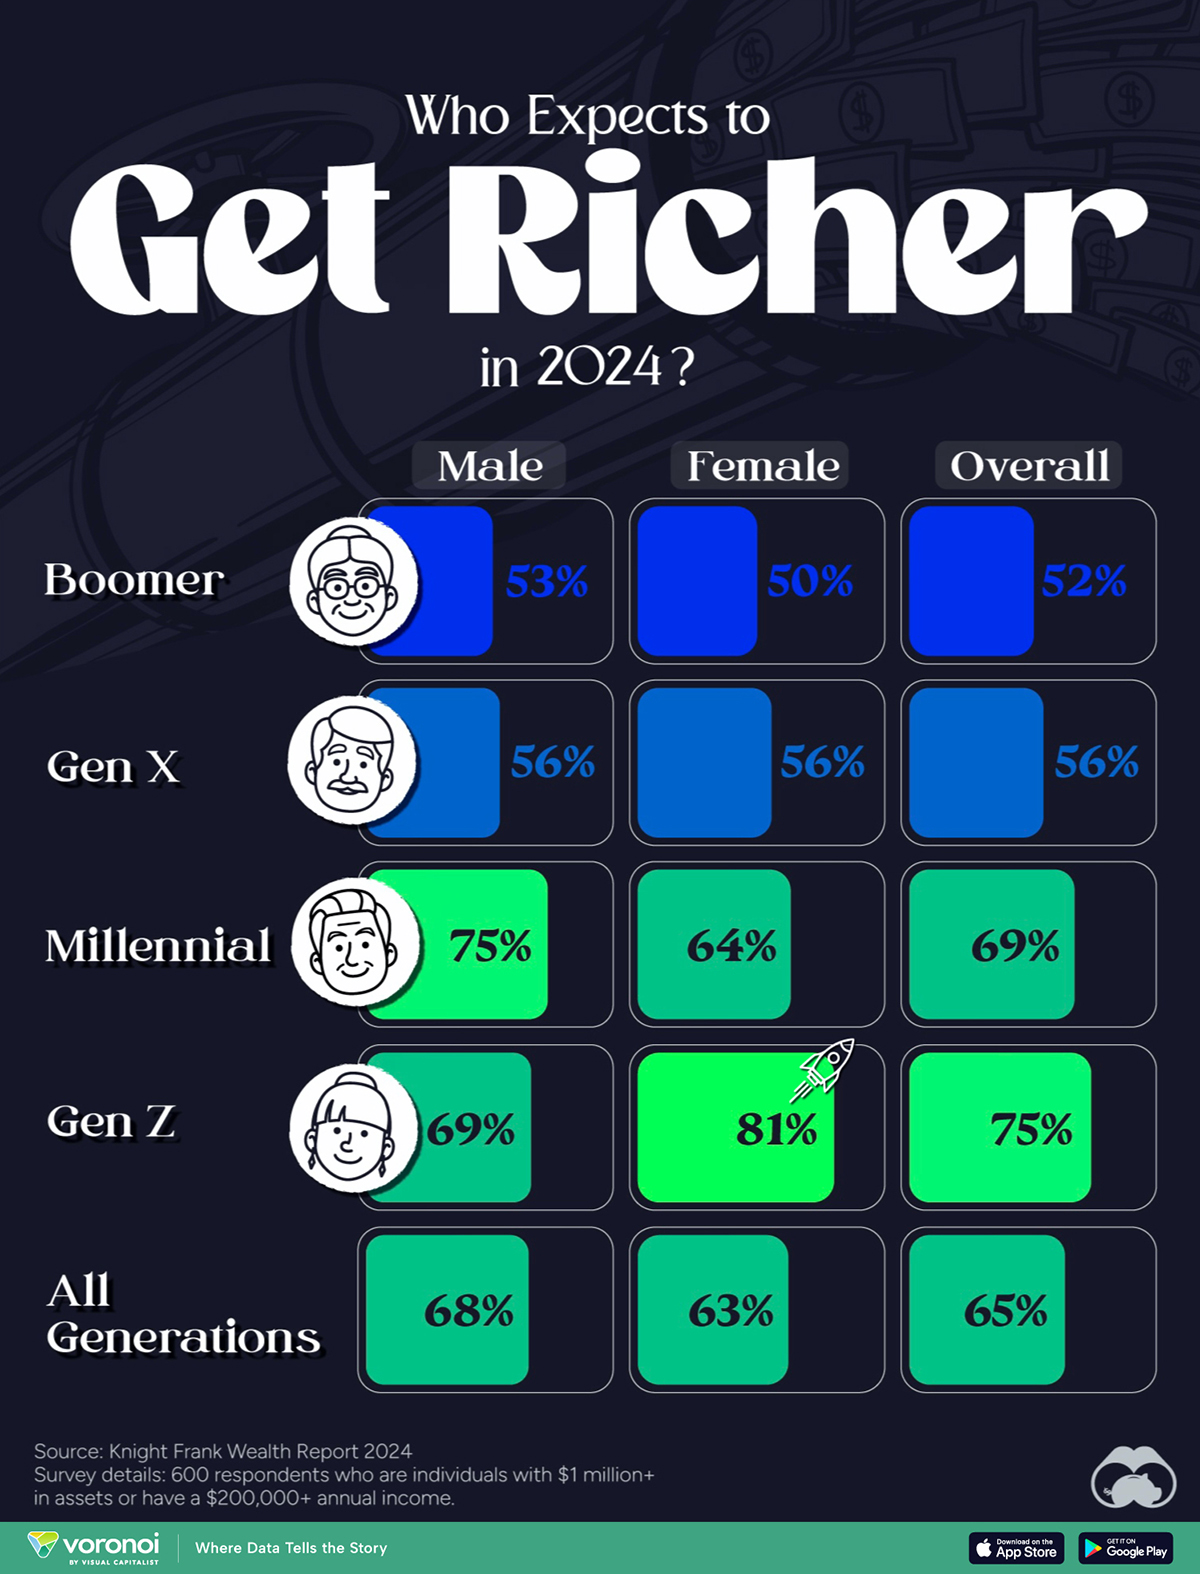 A chart breaking down the % of people surveyed by the Knight Frank Next Gen Survey, on if they expect to get richer, by generation and gender.A graph showing the percentage of people surveyed in the Knight Frank Next Gen Survey, sorted by generation and gender, and whether they anticipate a wealth increase in 2024.